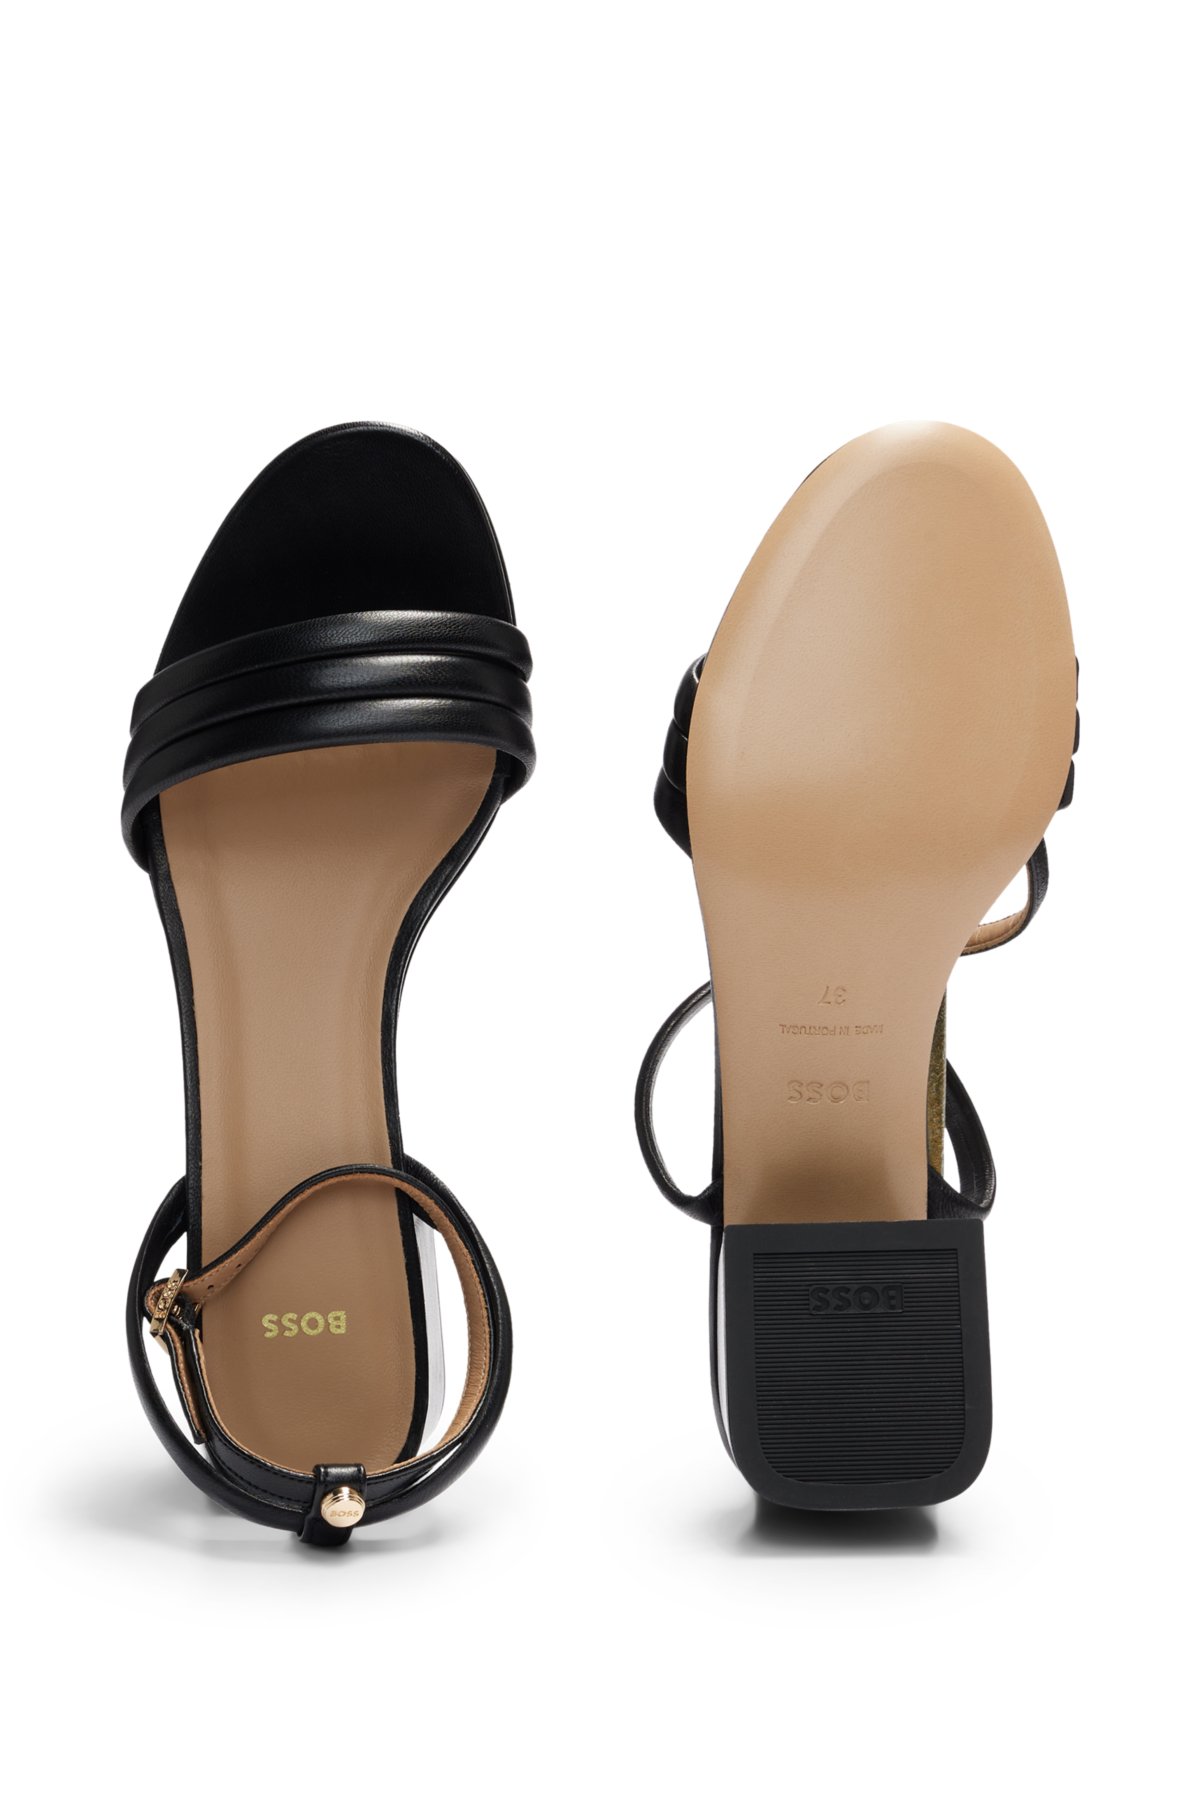 Padded-strap sandals with block heel, Black